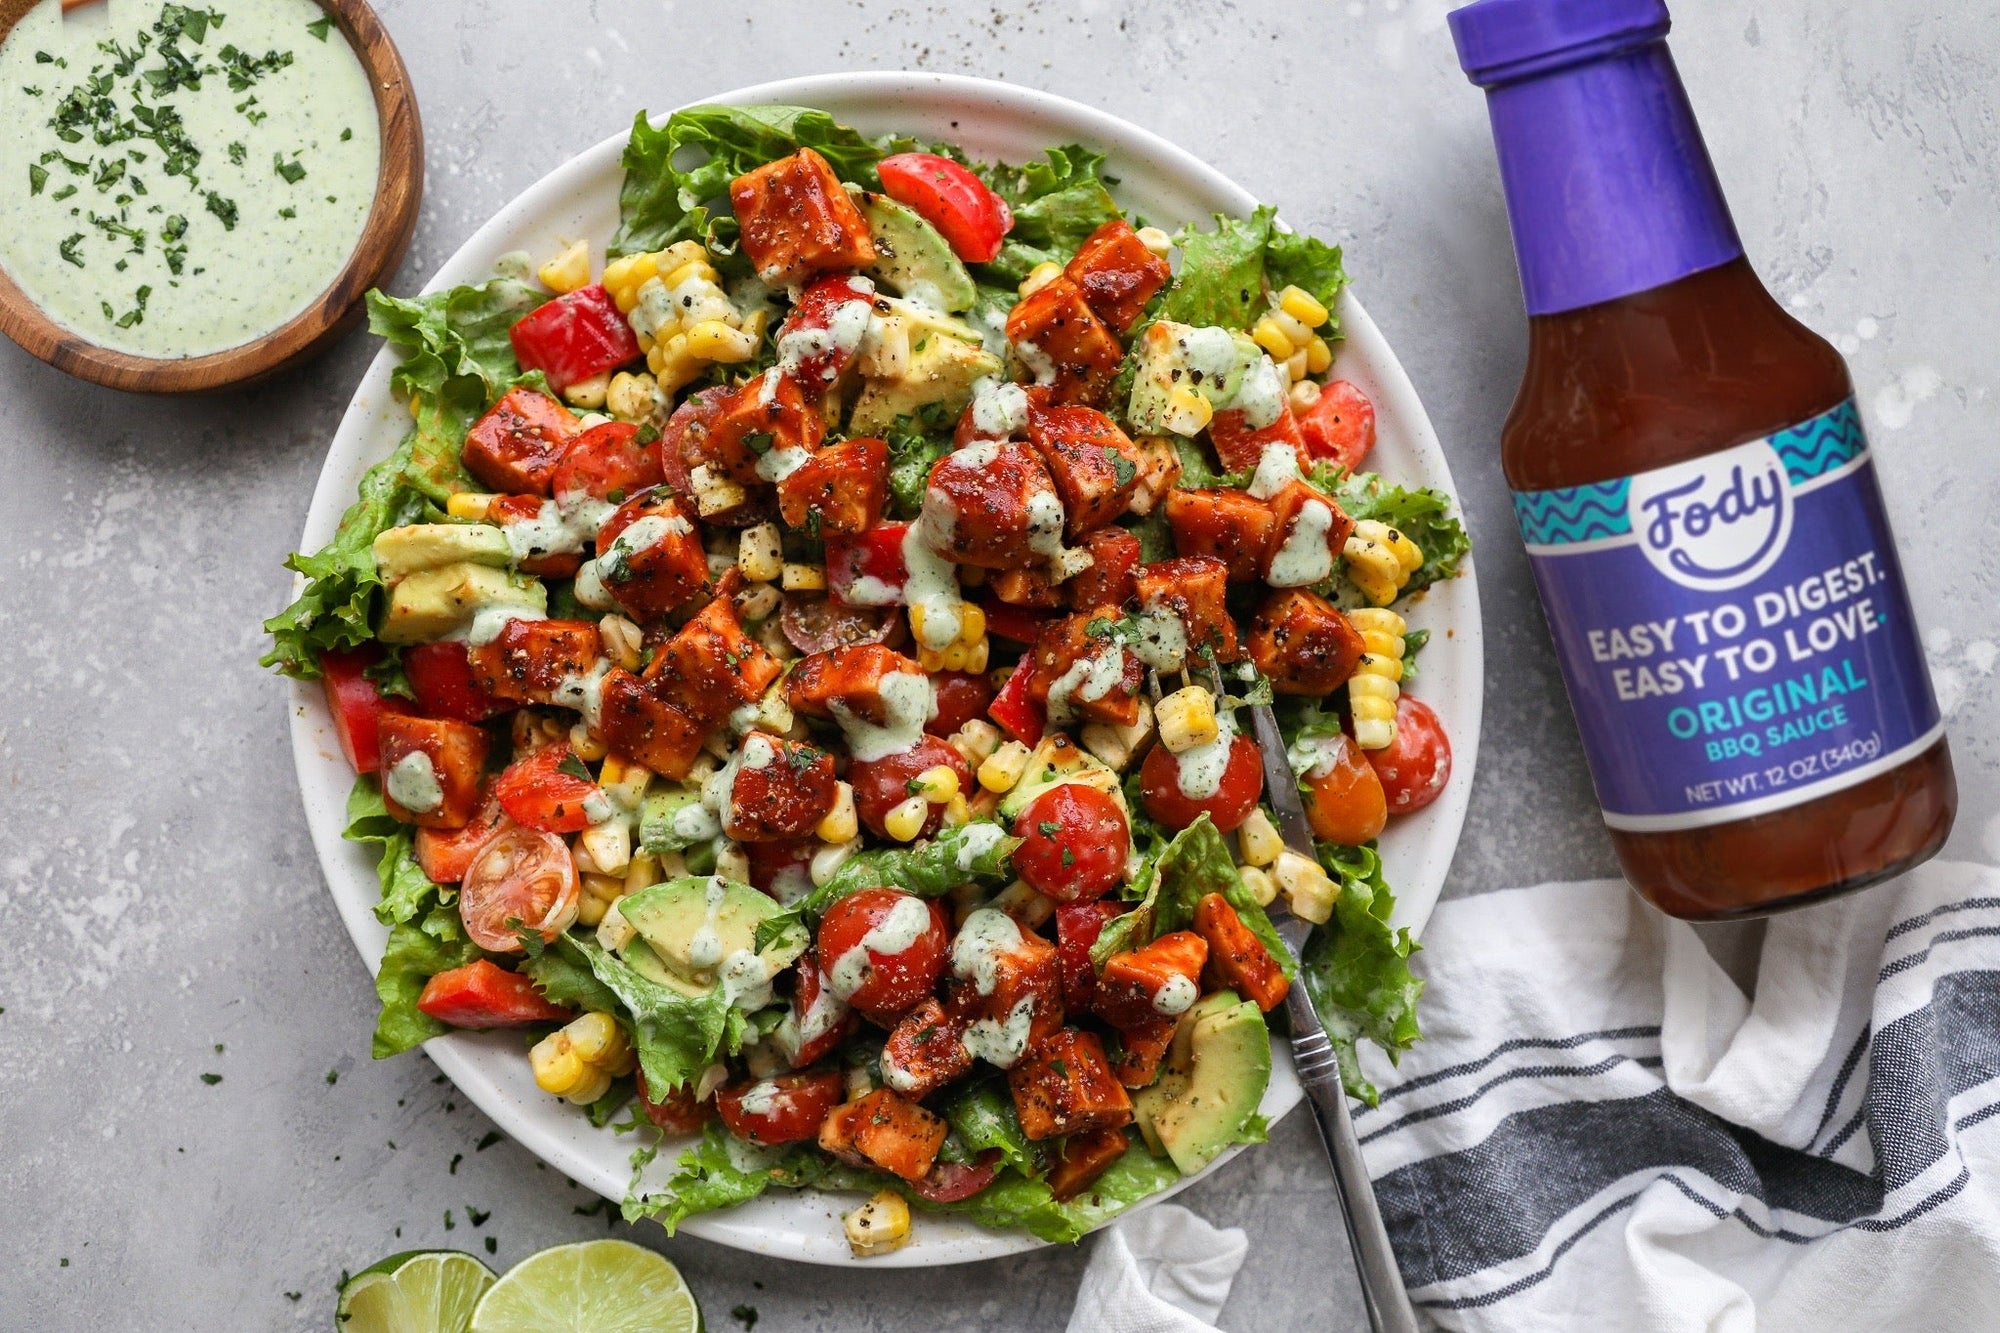 An image of Fody's BBQ chicken Cobb salad: a plate covered in corn, lettuce, bacon, cherry tomatoes, and BBQ chicken salad beside a bottle of Fody's maple BBQ sauce.